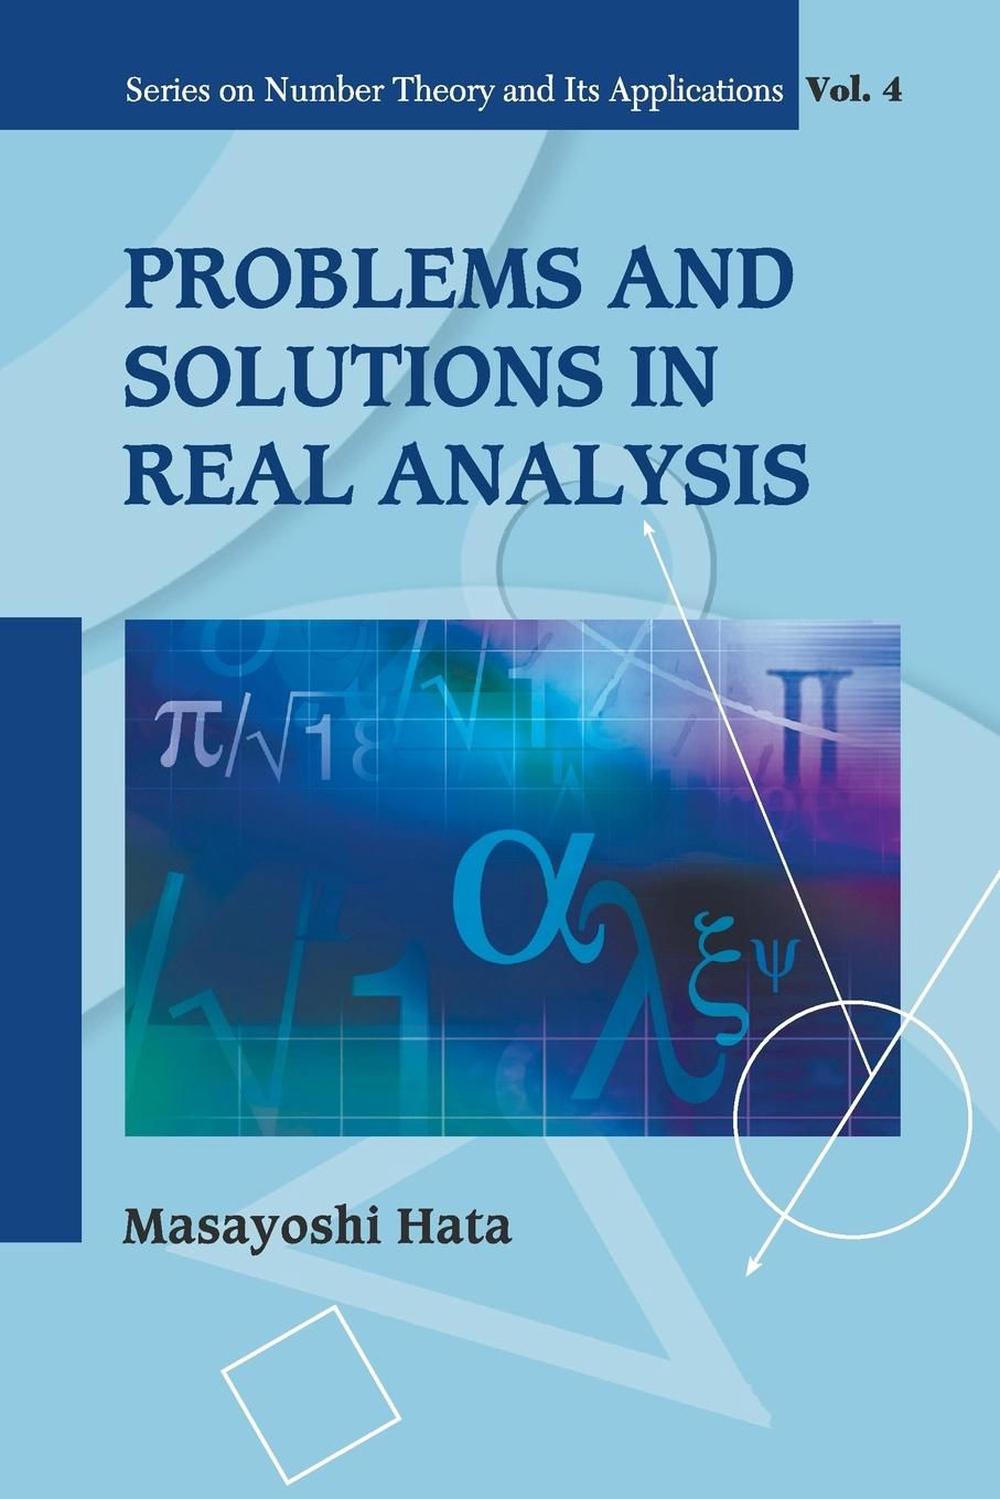 real analysis problem and solution pdf